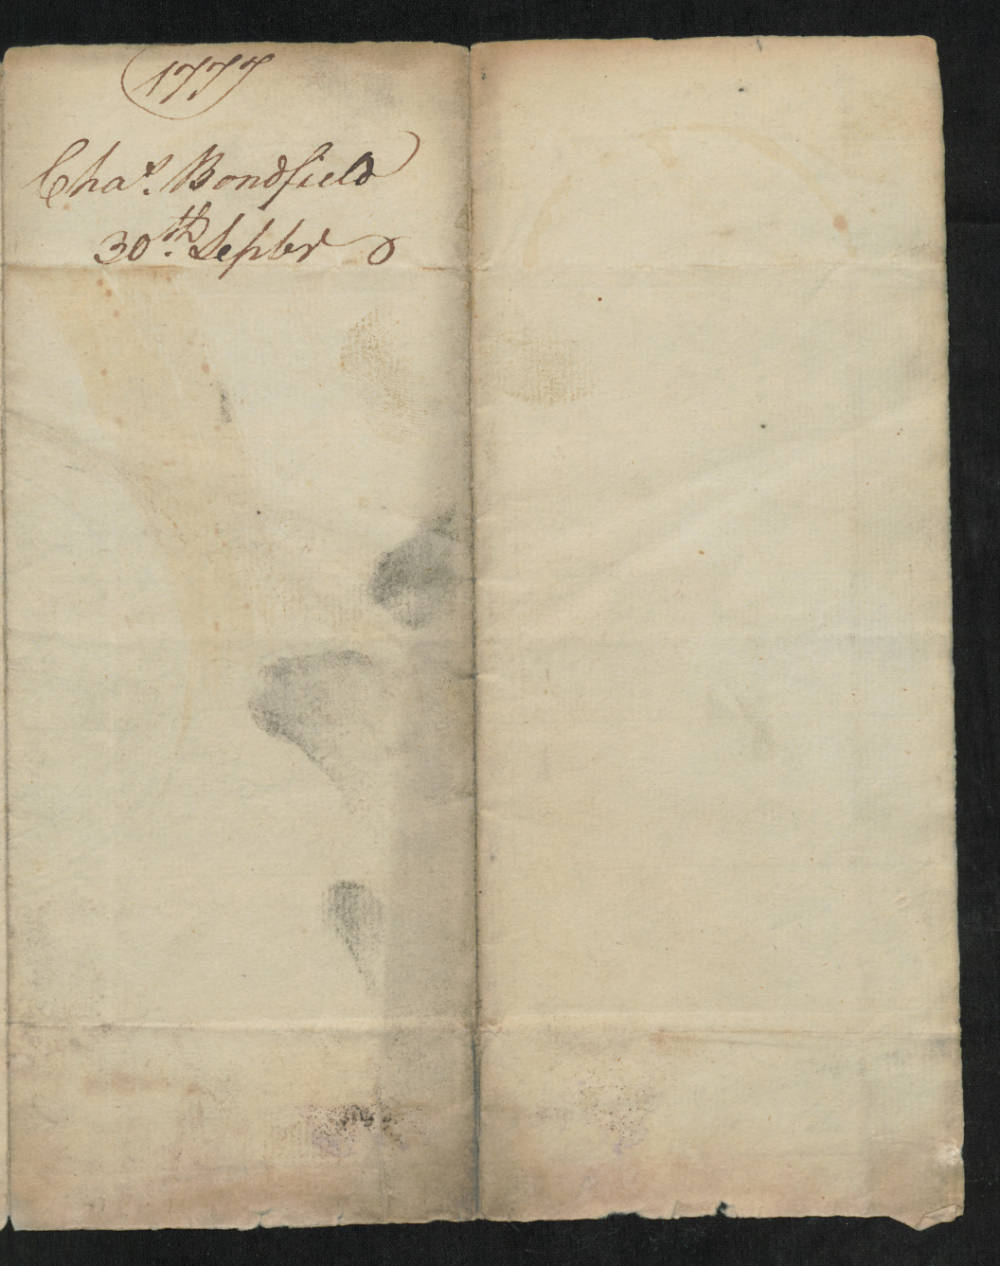 Letter from Joseph Blount, Robert Smith, and Charles Bondfield to Richard Caswell, 30 September 1777, page 3